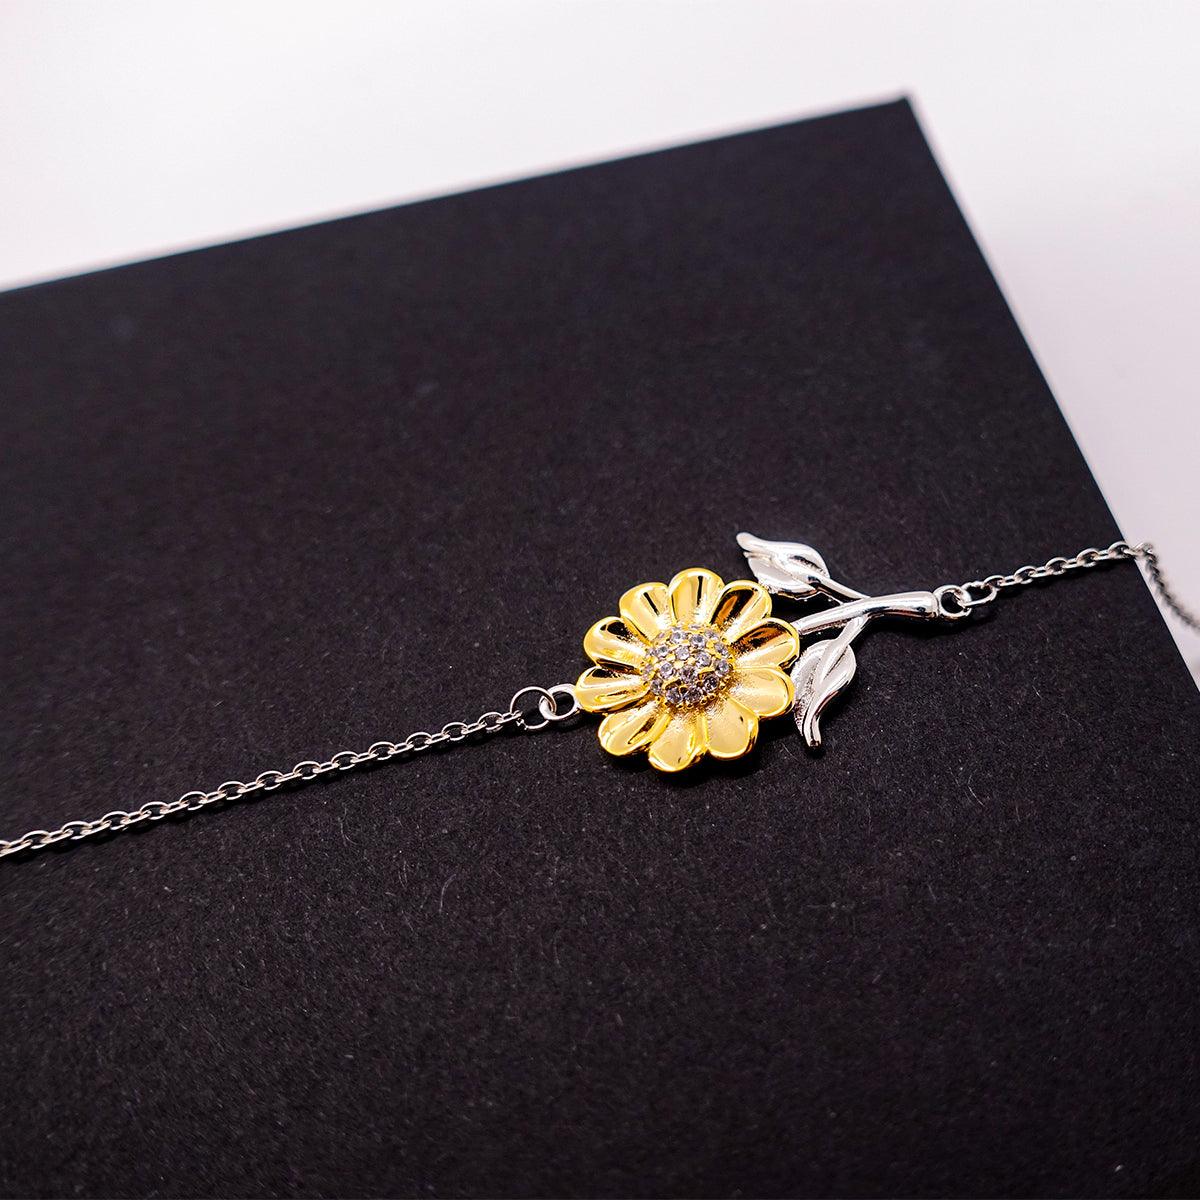 Remarkable Historian Gifts, Your dedication and hard work, Inspirational Birthday Christmas Unique Sunflower Bracelet For Historian, Coworkers, Men, Women, Friends - Mallard Moon Gift Shop